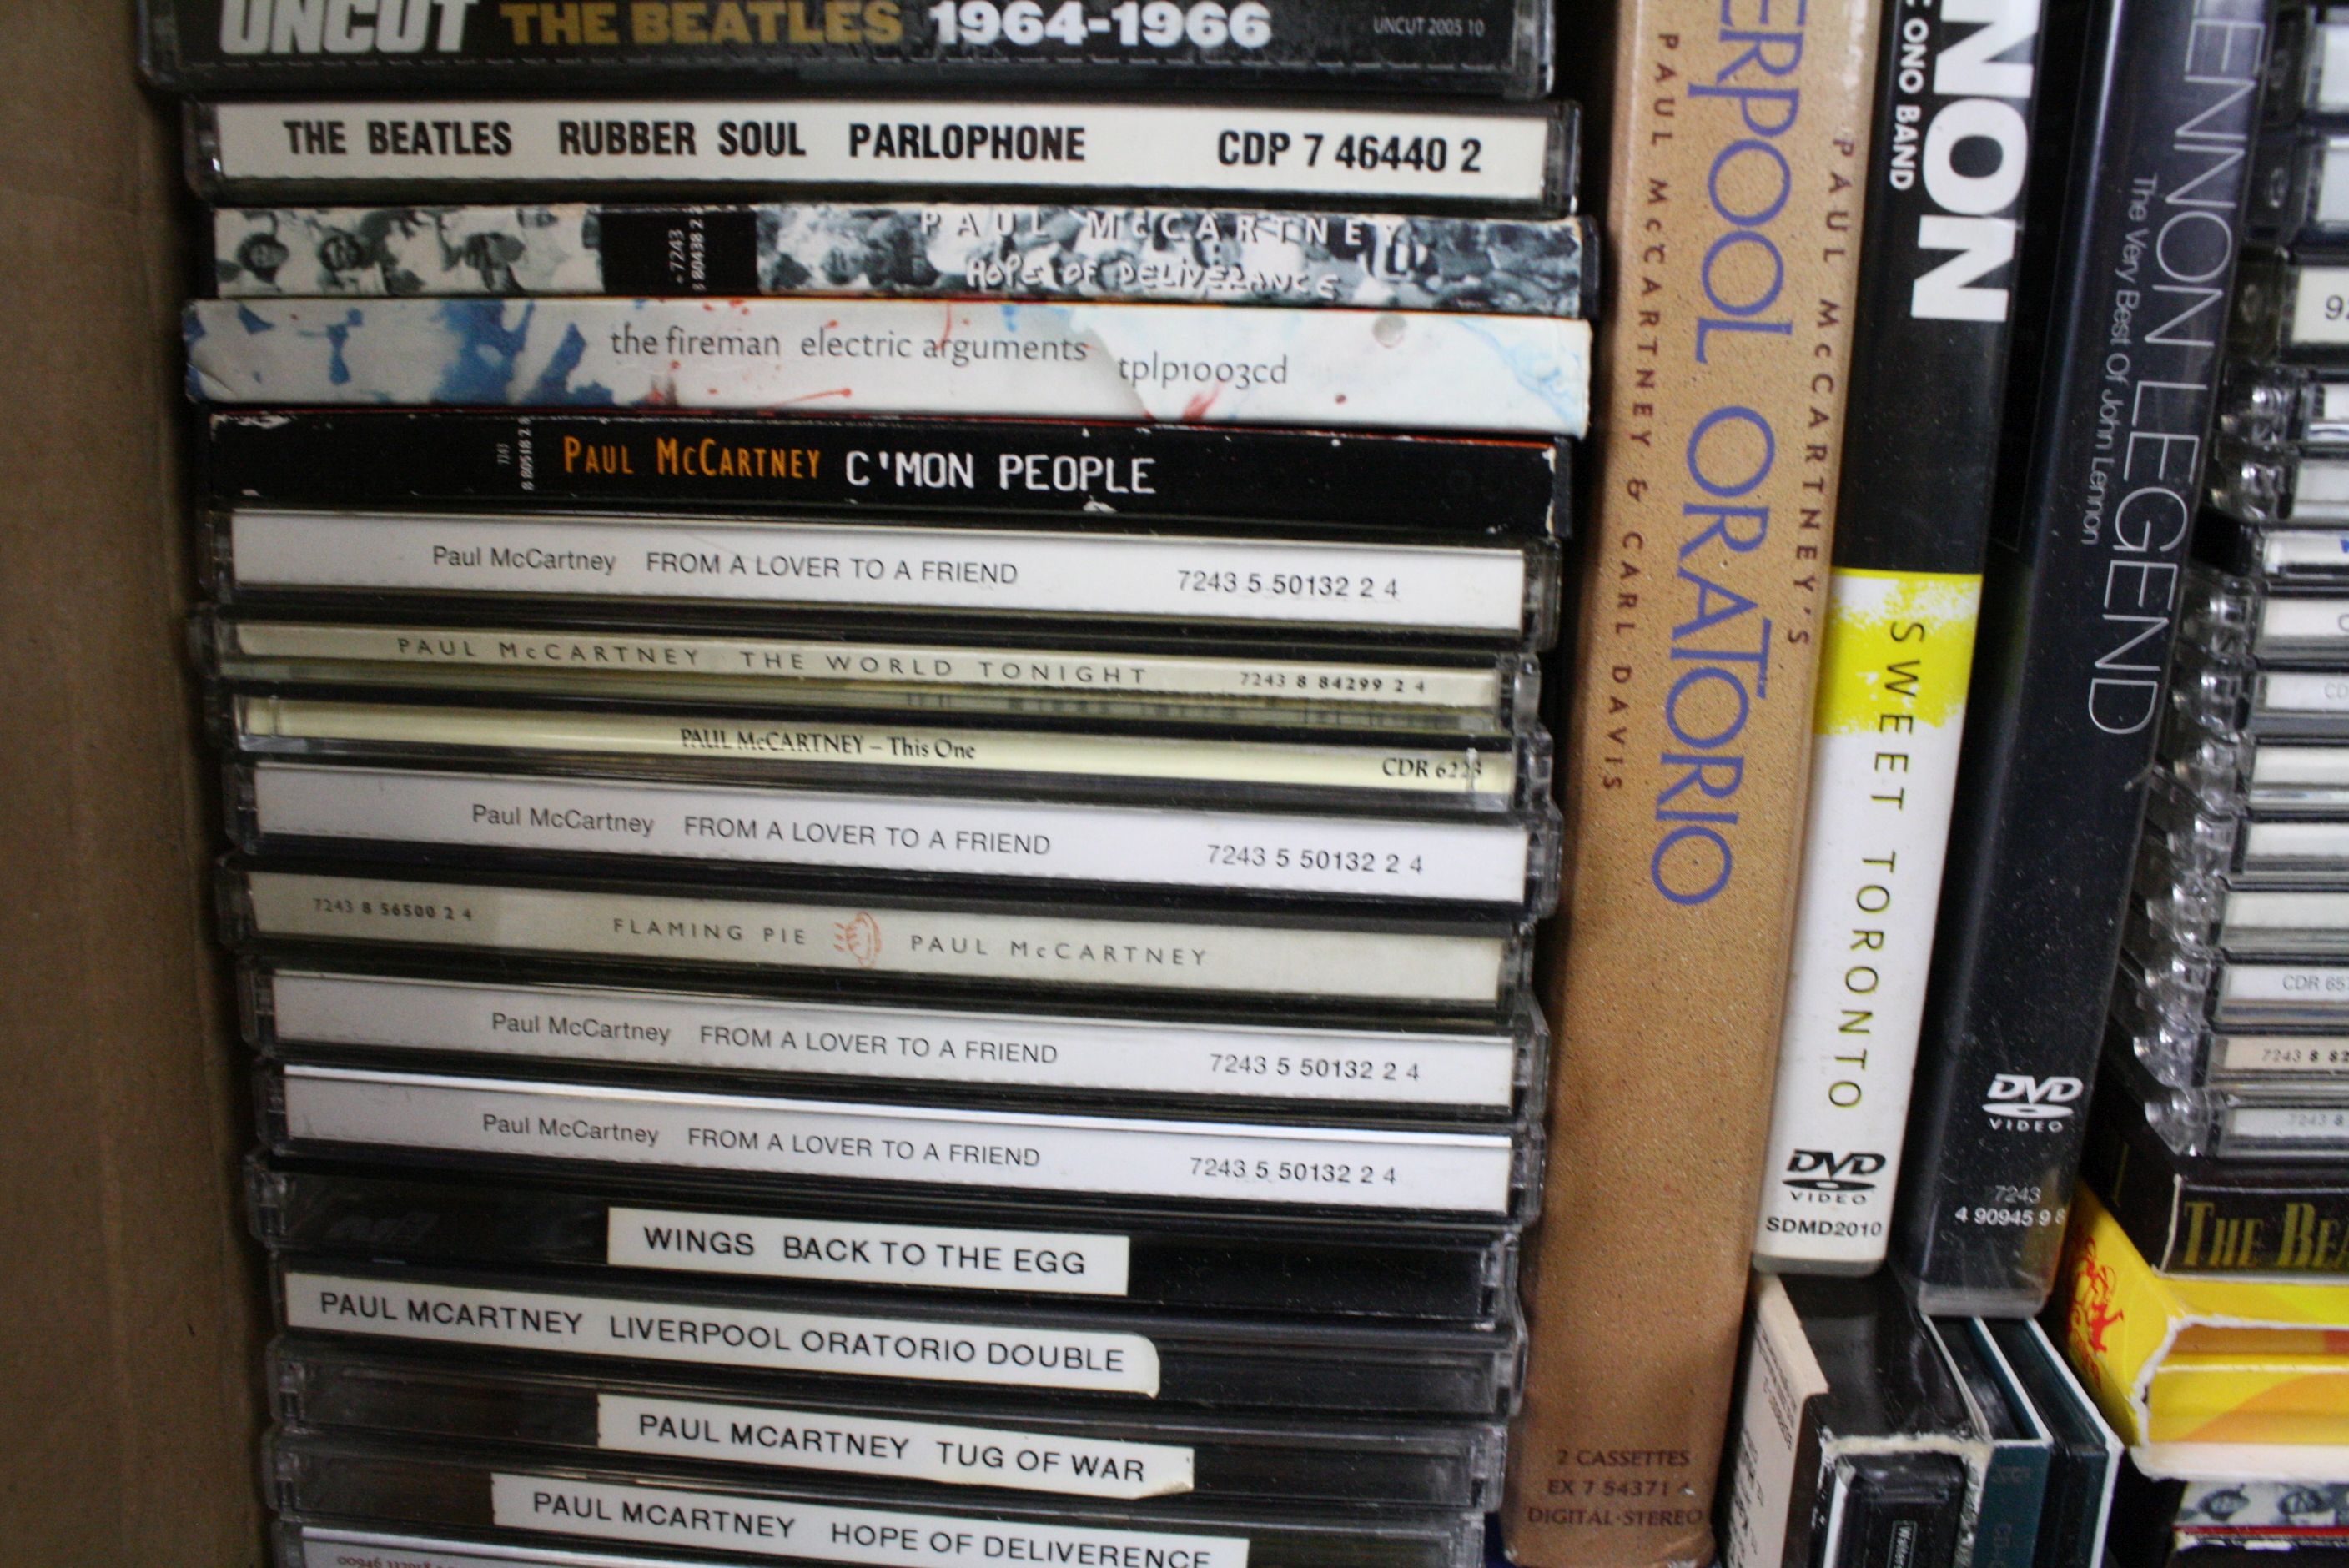 CDs - Over 150 Beatles and related CD's including imports, box sets, singles, giveaways, private - Image 6 of 18